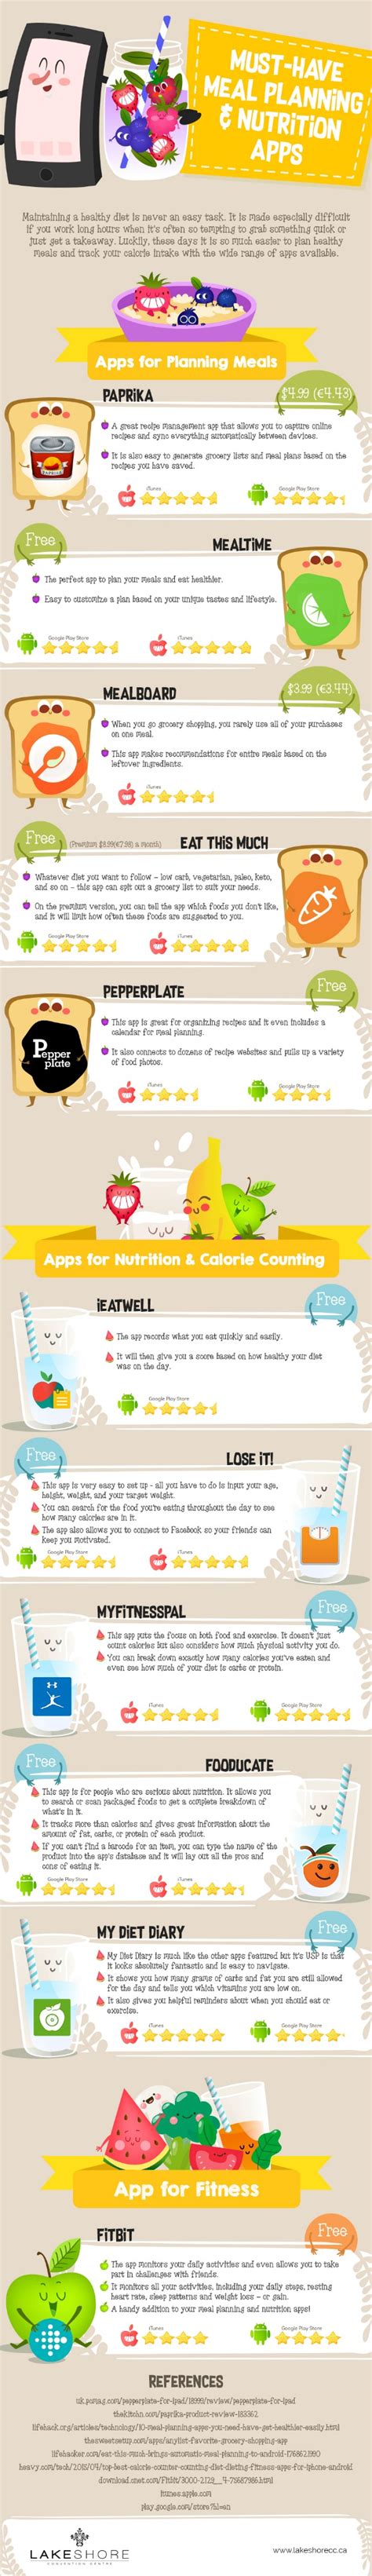 The beauty of using meal planning apps is that it's all digital! 11 Must-Have Meal Planning and Nutrition Apps Infographic